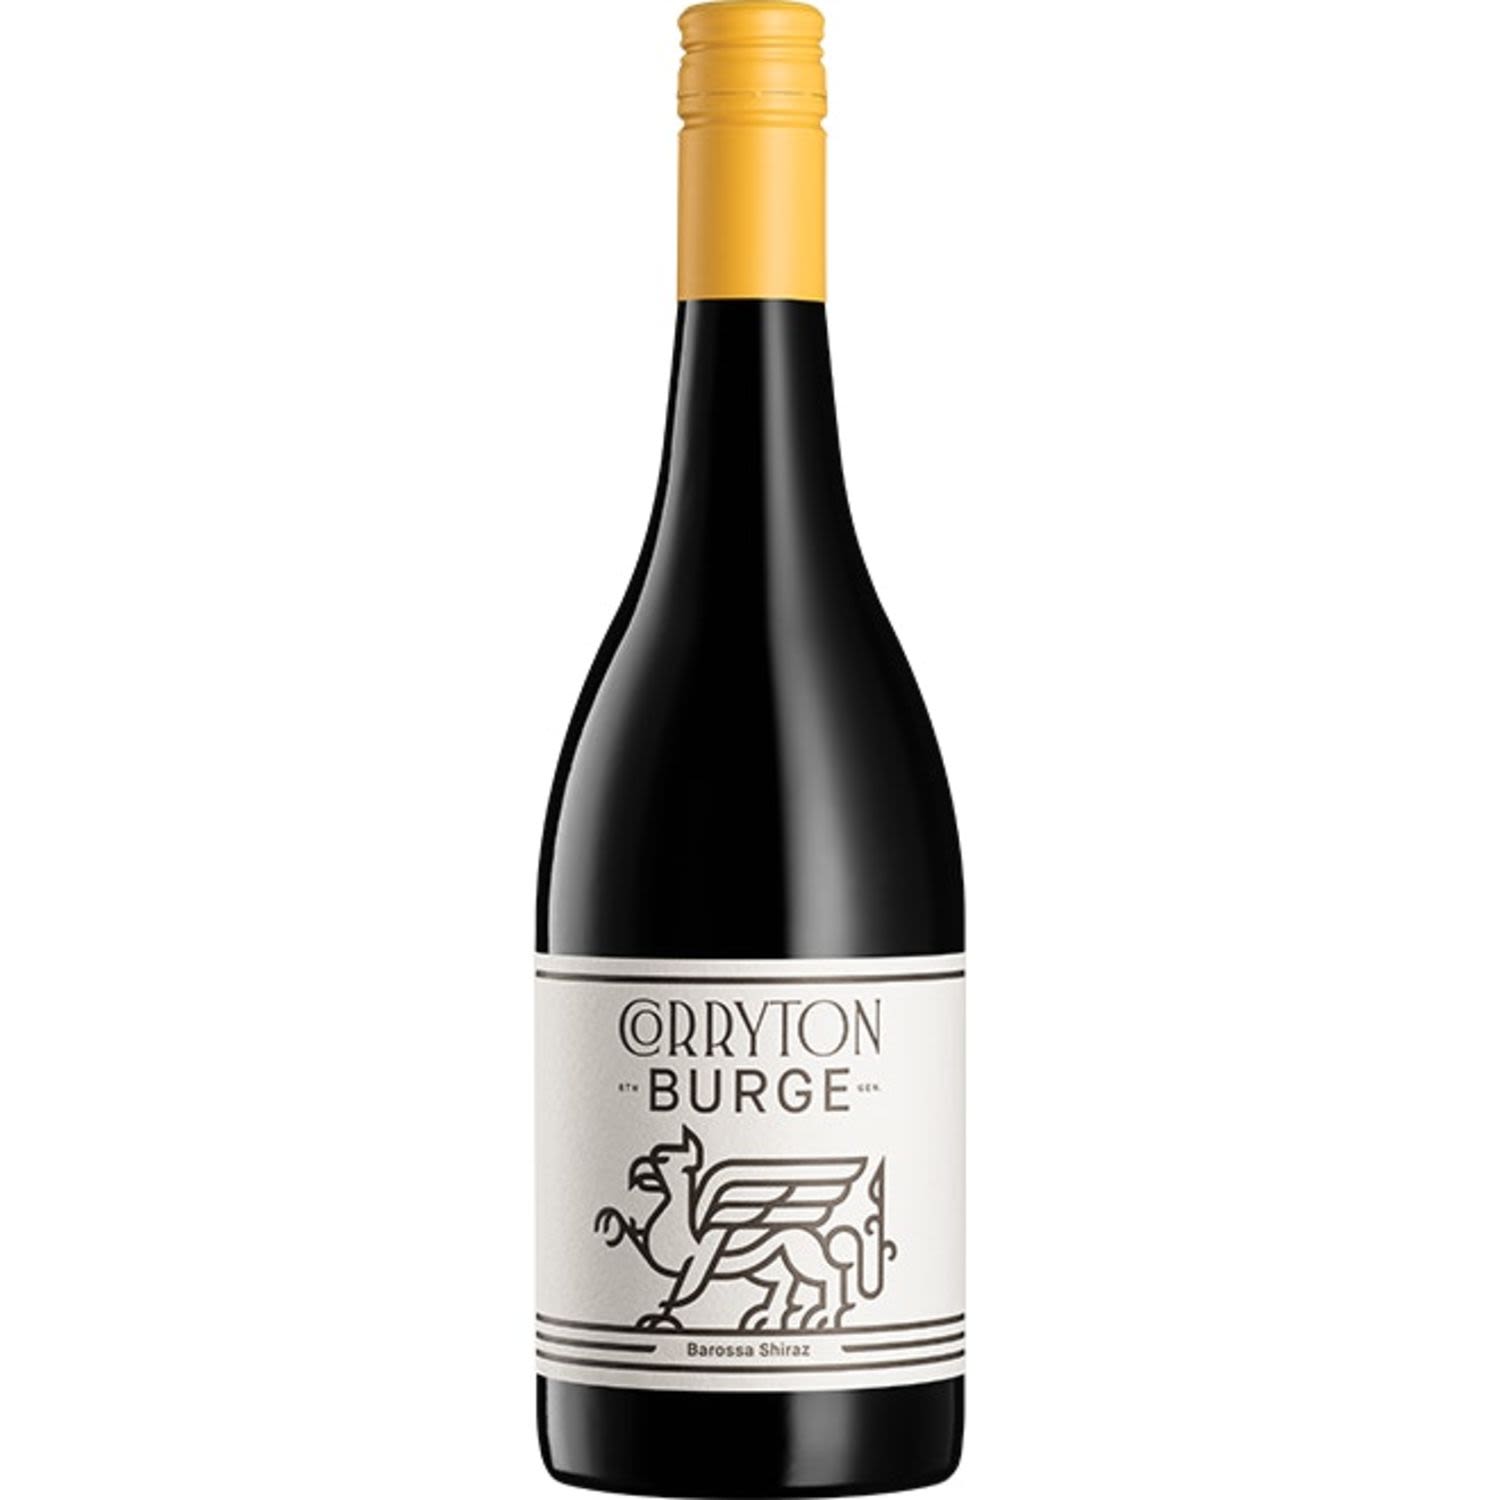 Corryton Burge Barossa Shiraz is a fruit driven but approachable style with generous Barossan fruit.<br /> <br />Alcohol Volume: 15.00%<br /><br />Pack Format: Bottle<br /><br />Standard Drinks: 8.9</br /><br />Pack Type: Bottle<br /><br />Country of Origin: Australia<br /><br />Region: Barossa Valley<br /><br />Vintage: Vintages Vary<br />